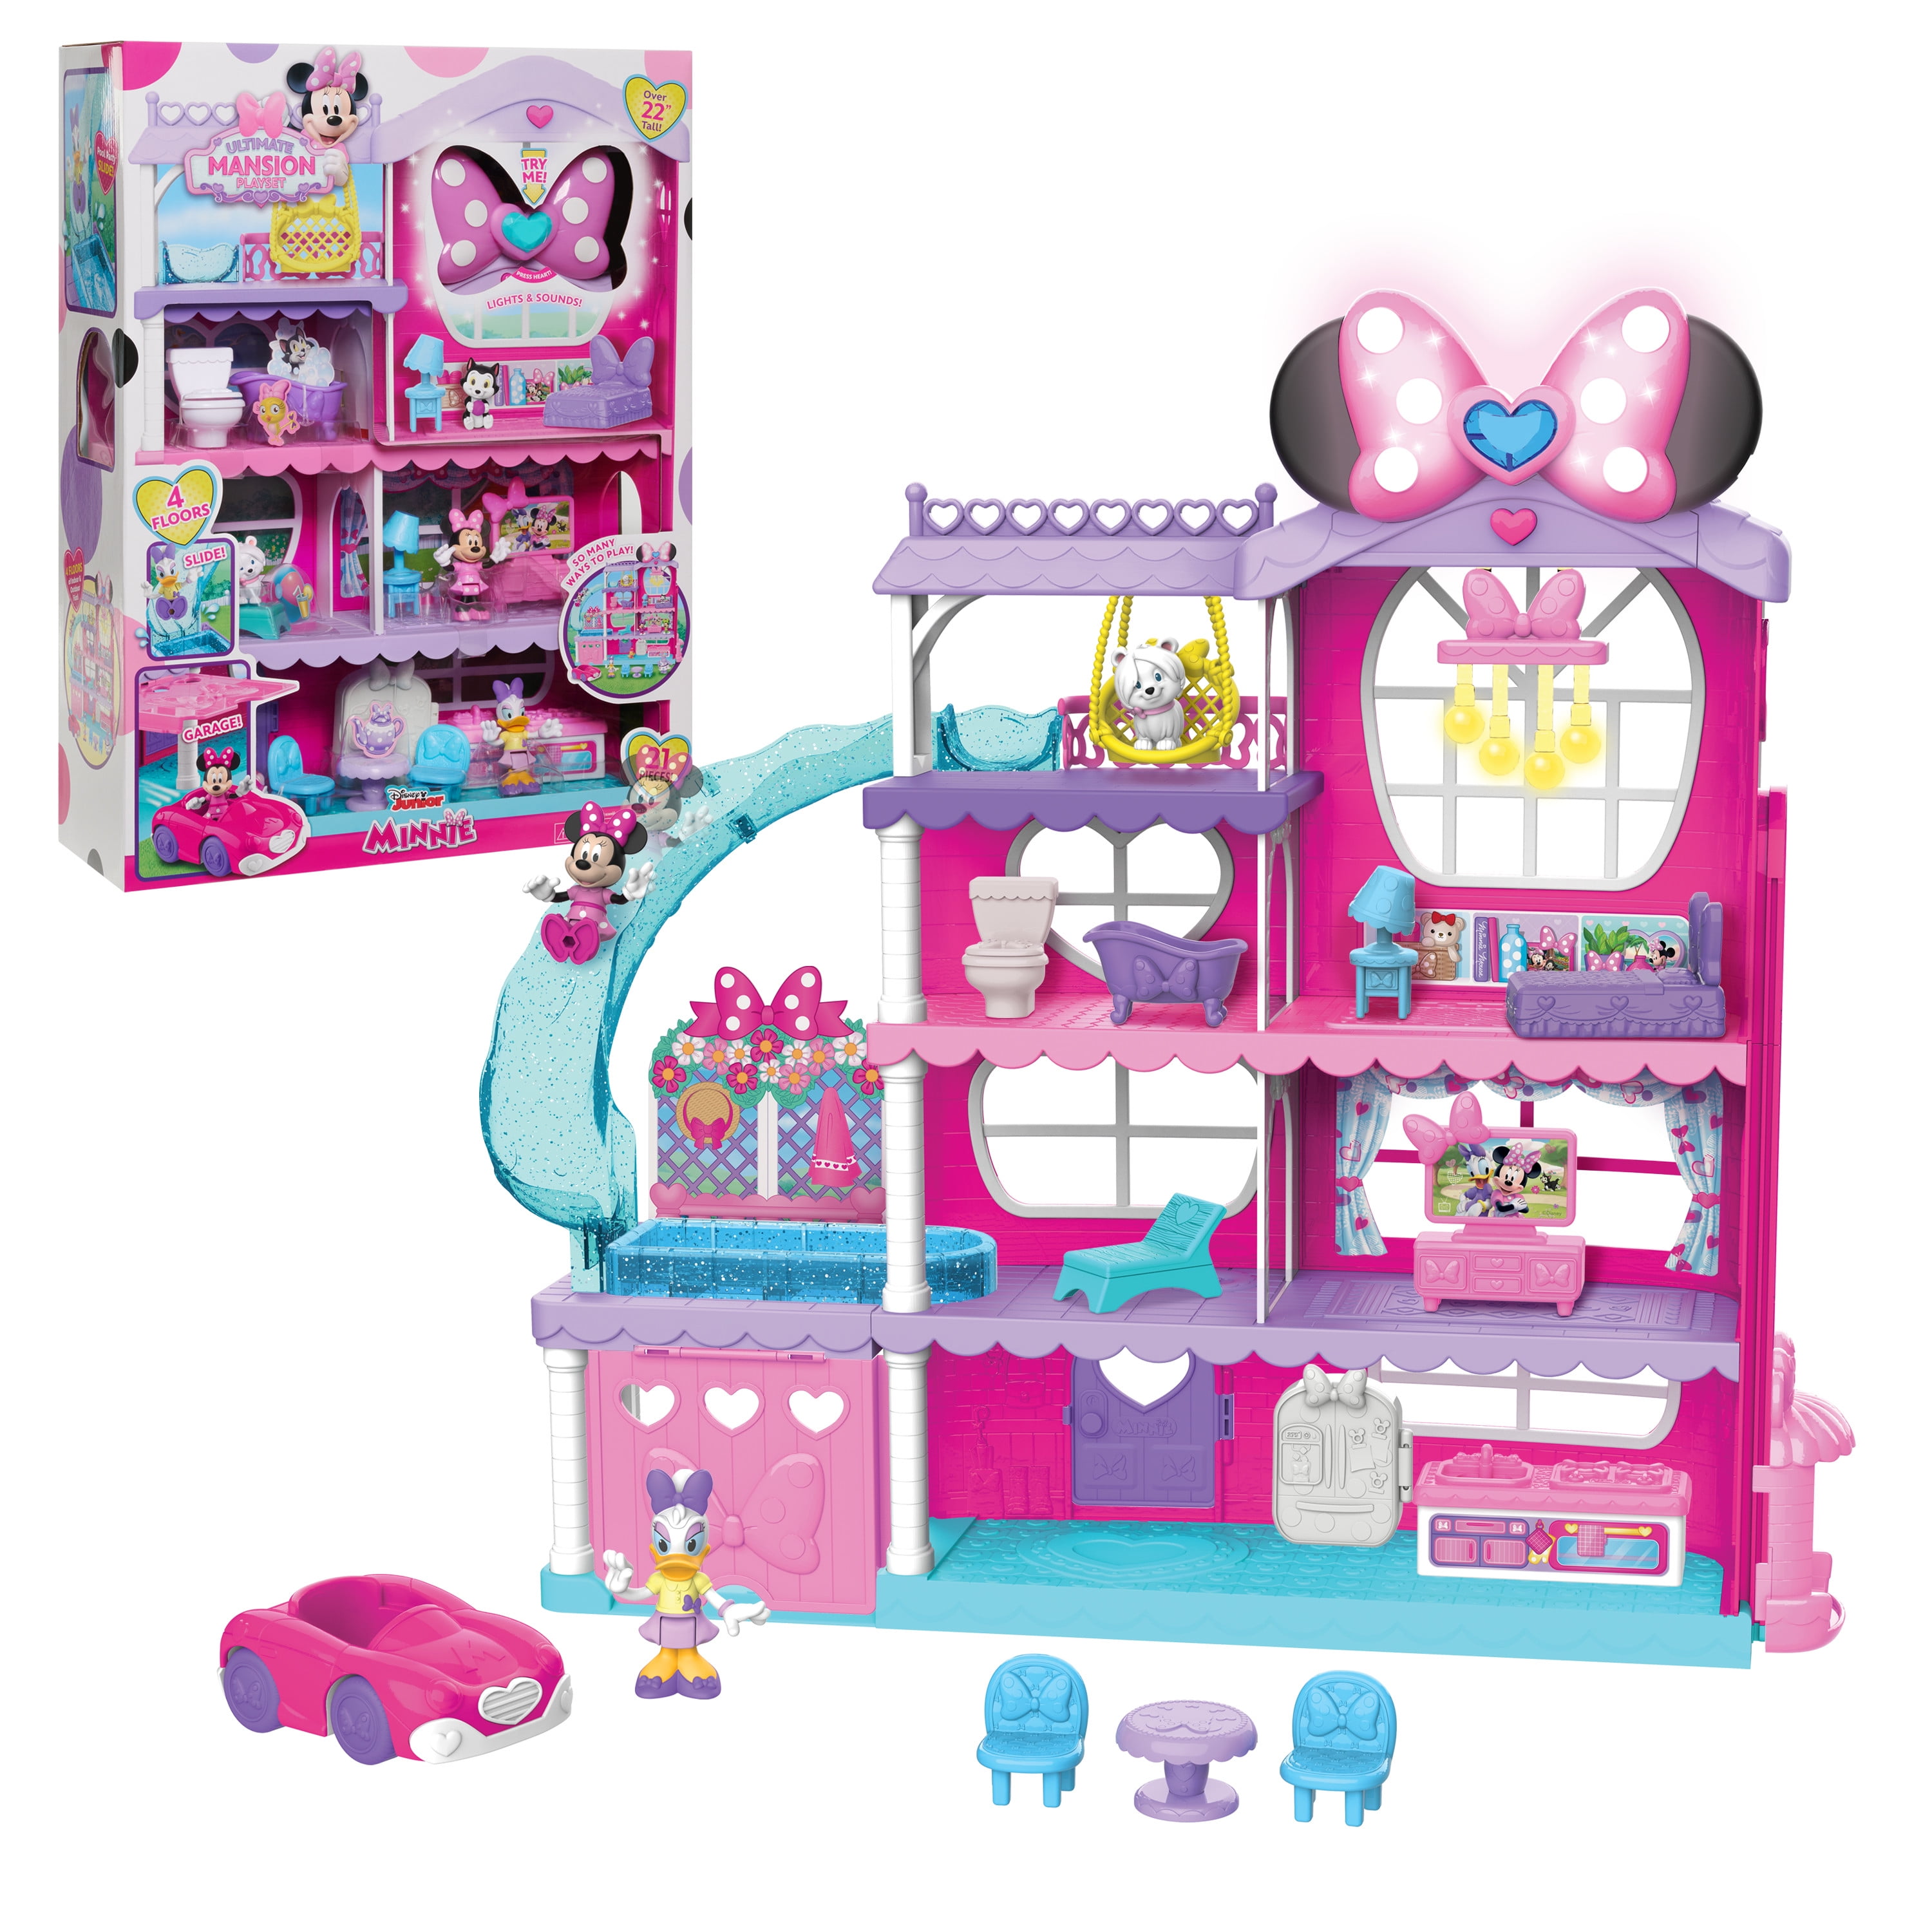 Disney Junior Minnie Mouse Ultimate Mansion 22-inch Playset, Figures, and Accessories, Officially Licensed Kids Toys for Ages 3 Up, Gifts and Presents